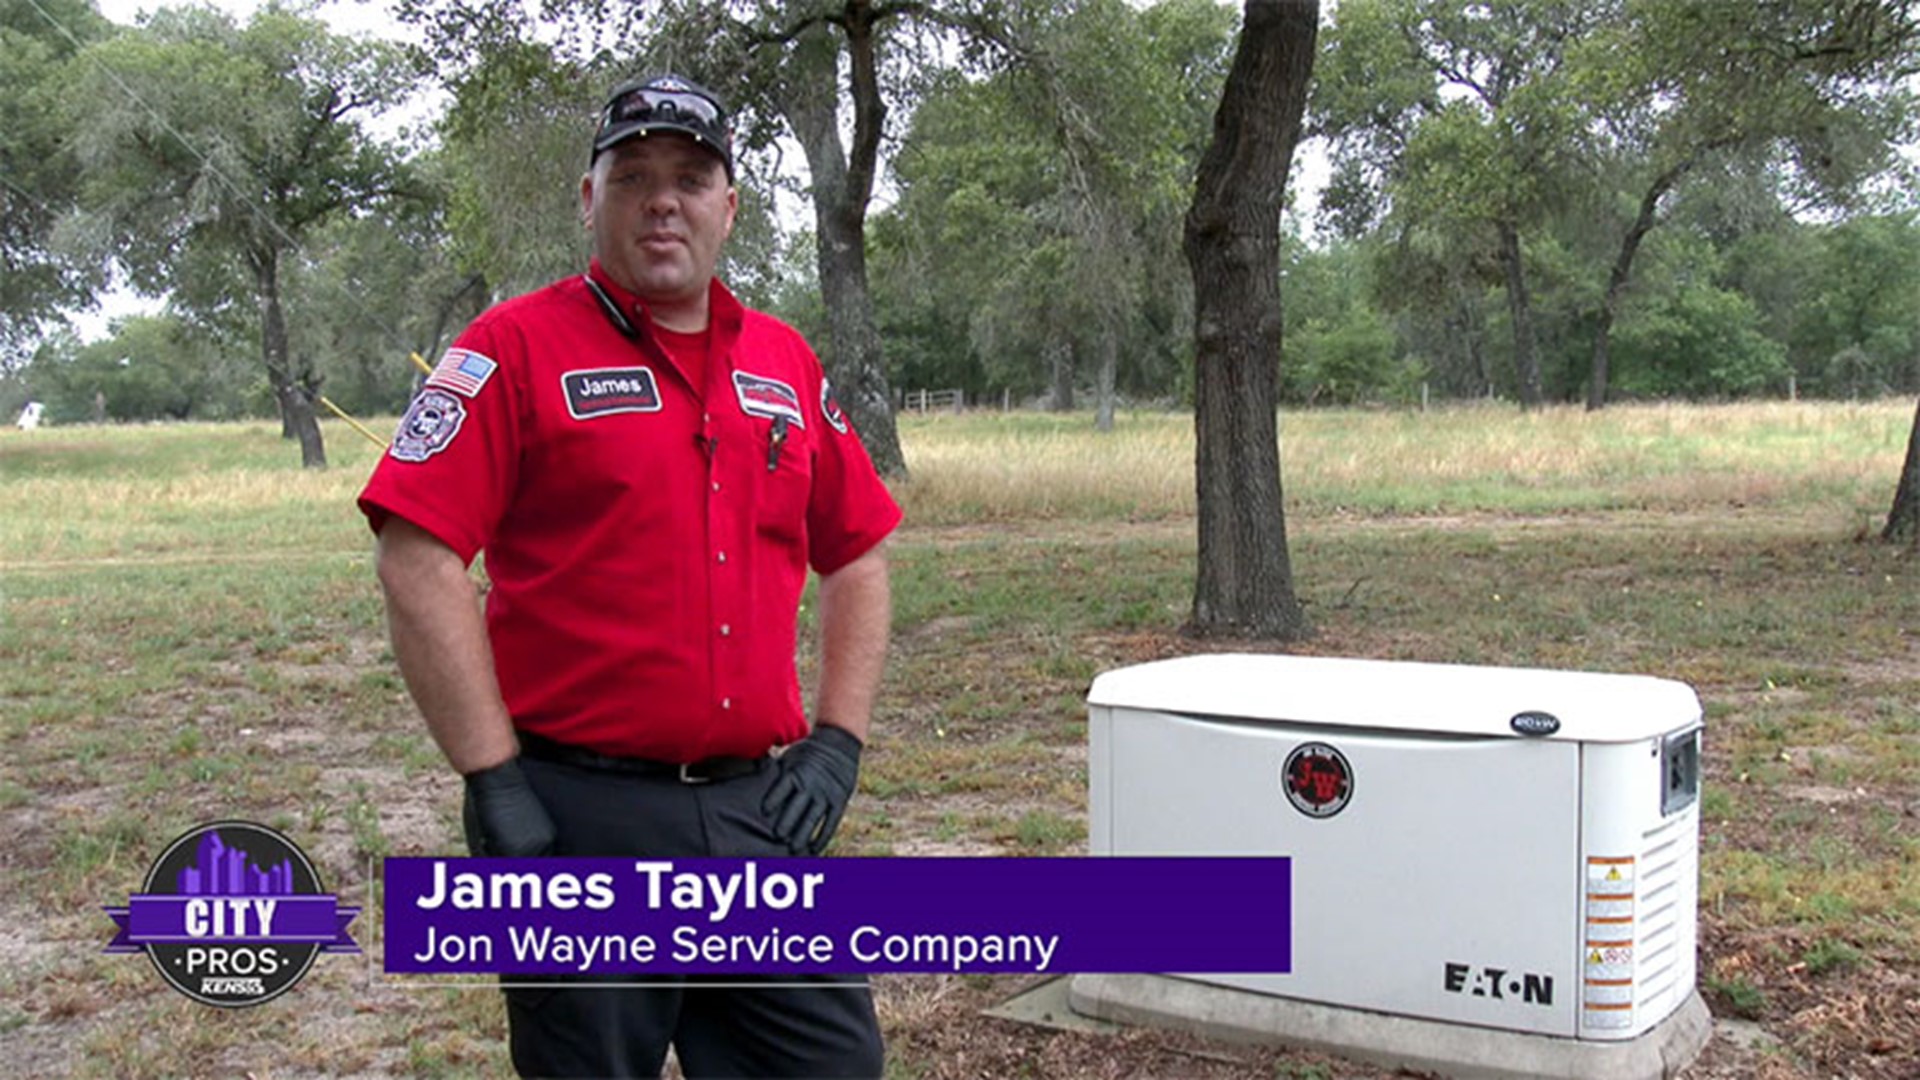 A generator system provides power automatically for your home when there's an outage. Jon Wayne helps make sure your unit is ready to go when you need it.